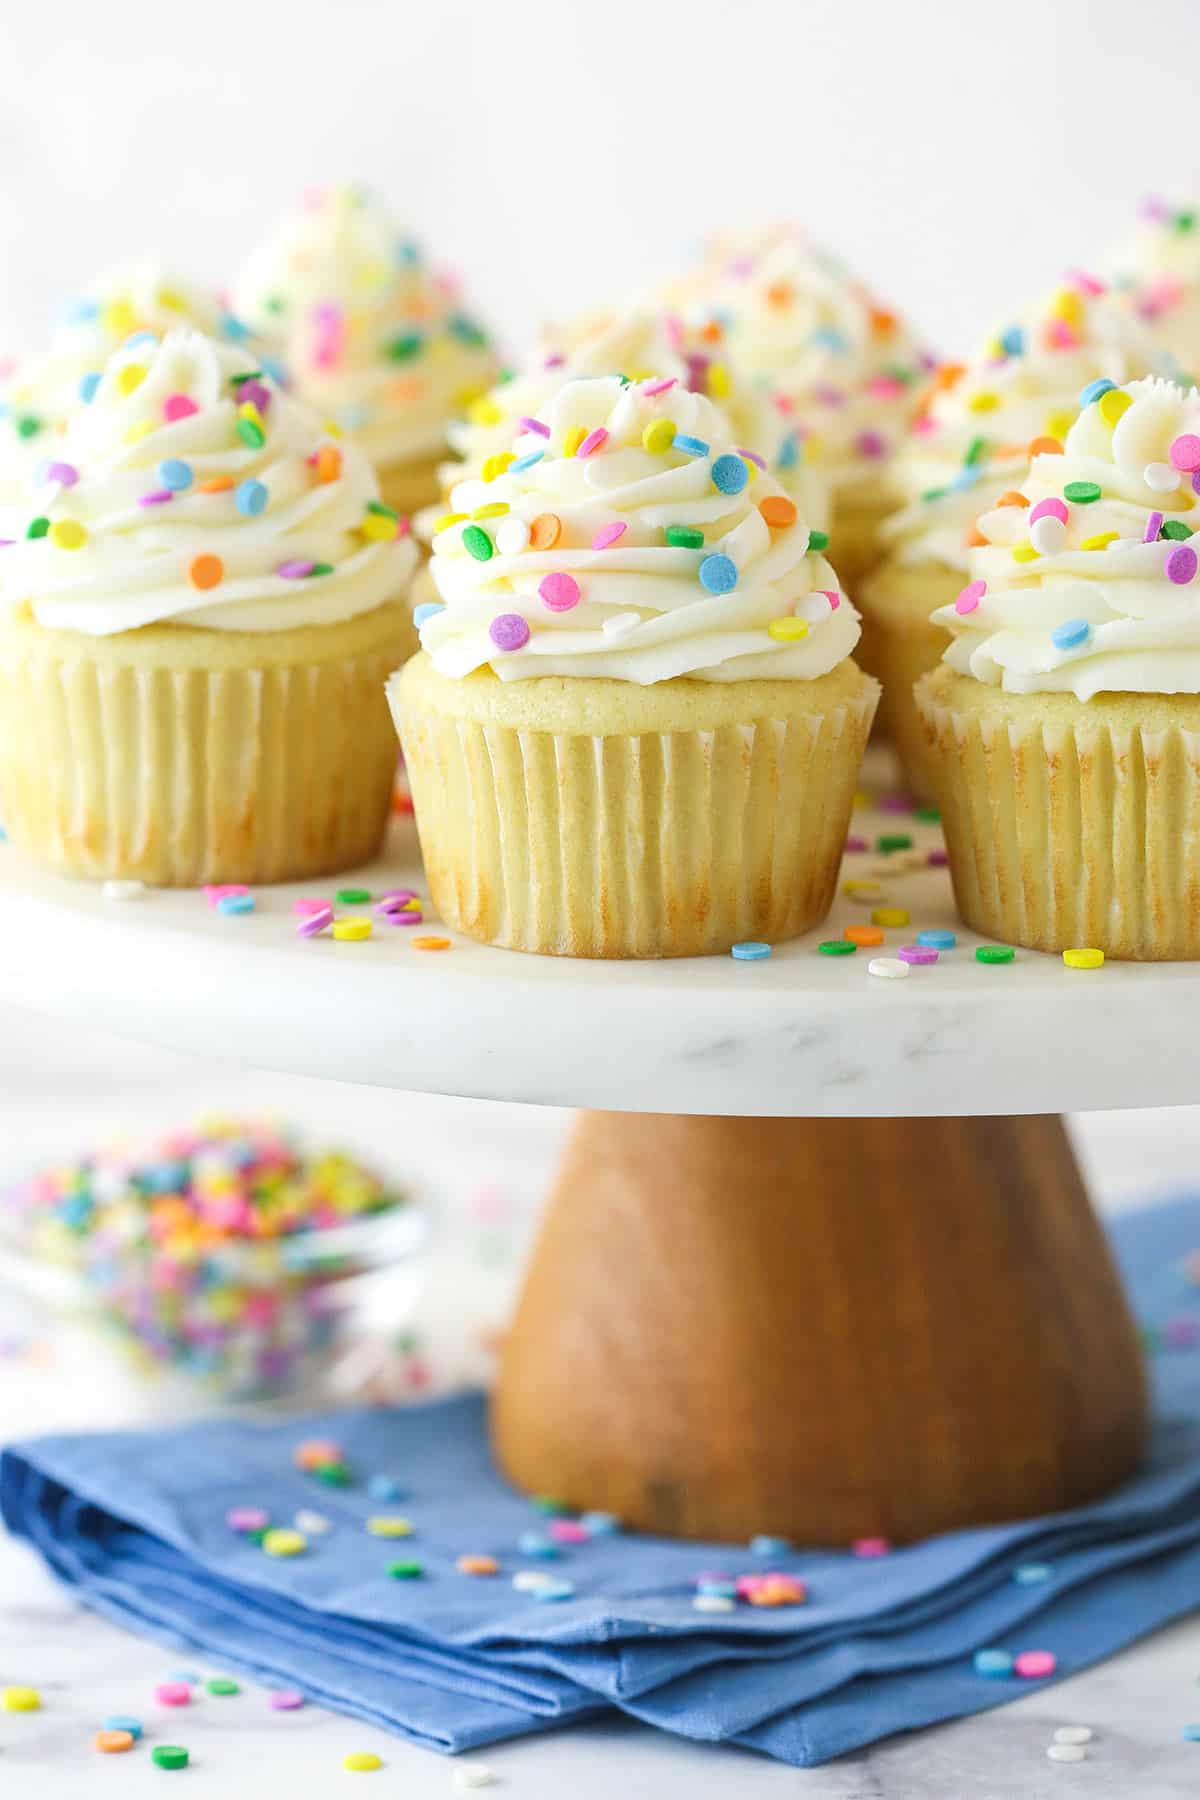 Vanilla cupcakes on a cupcake stand.